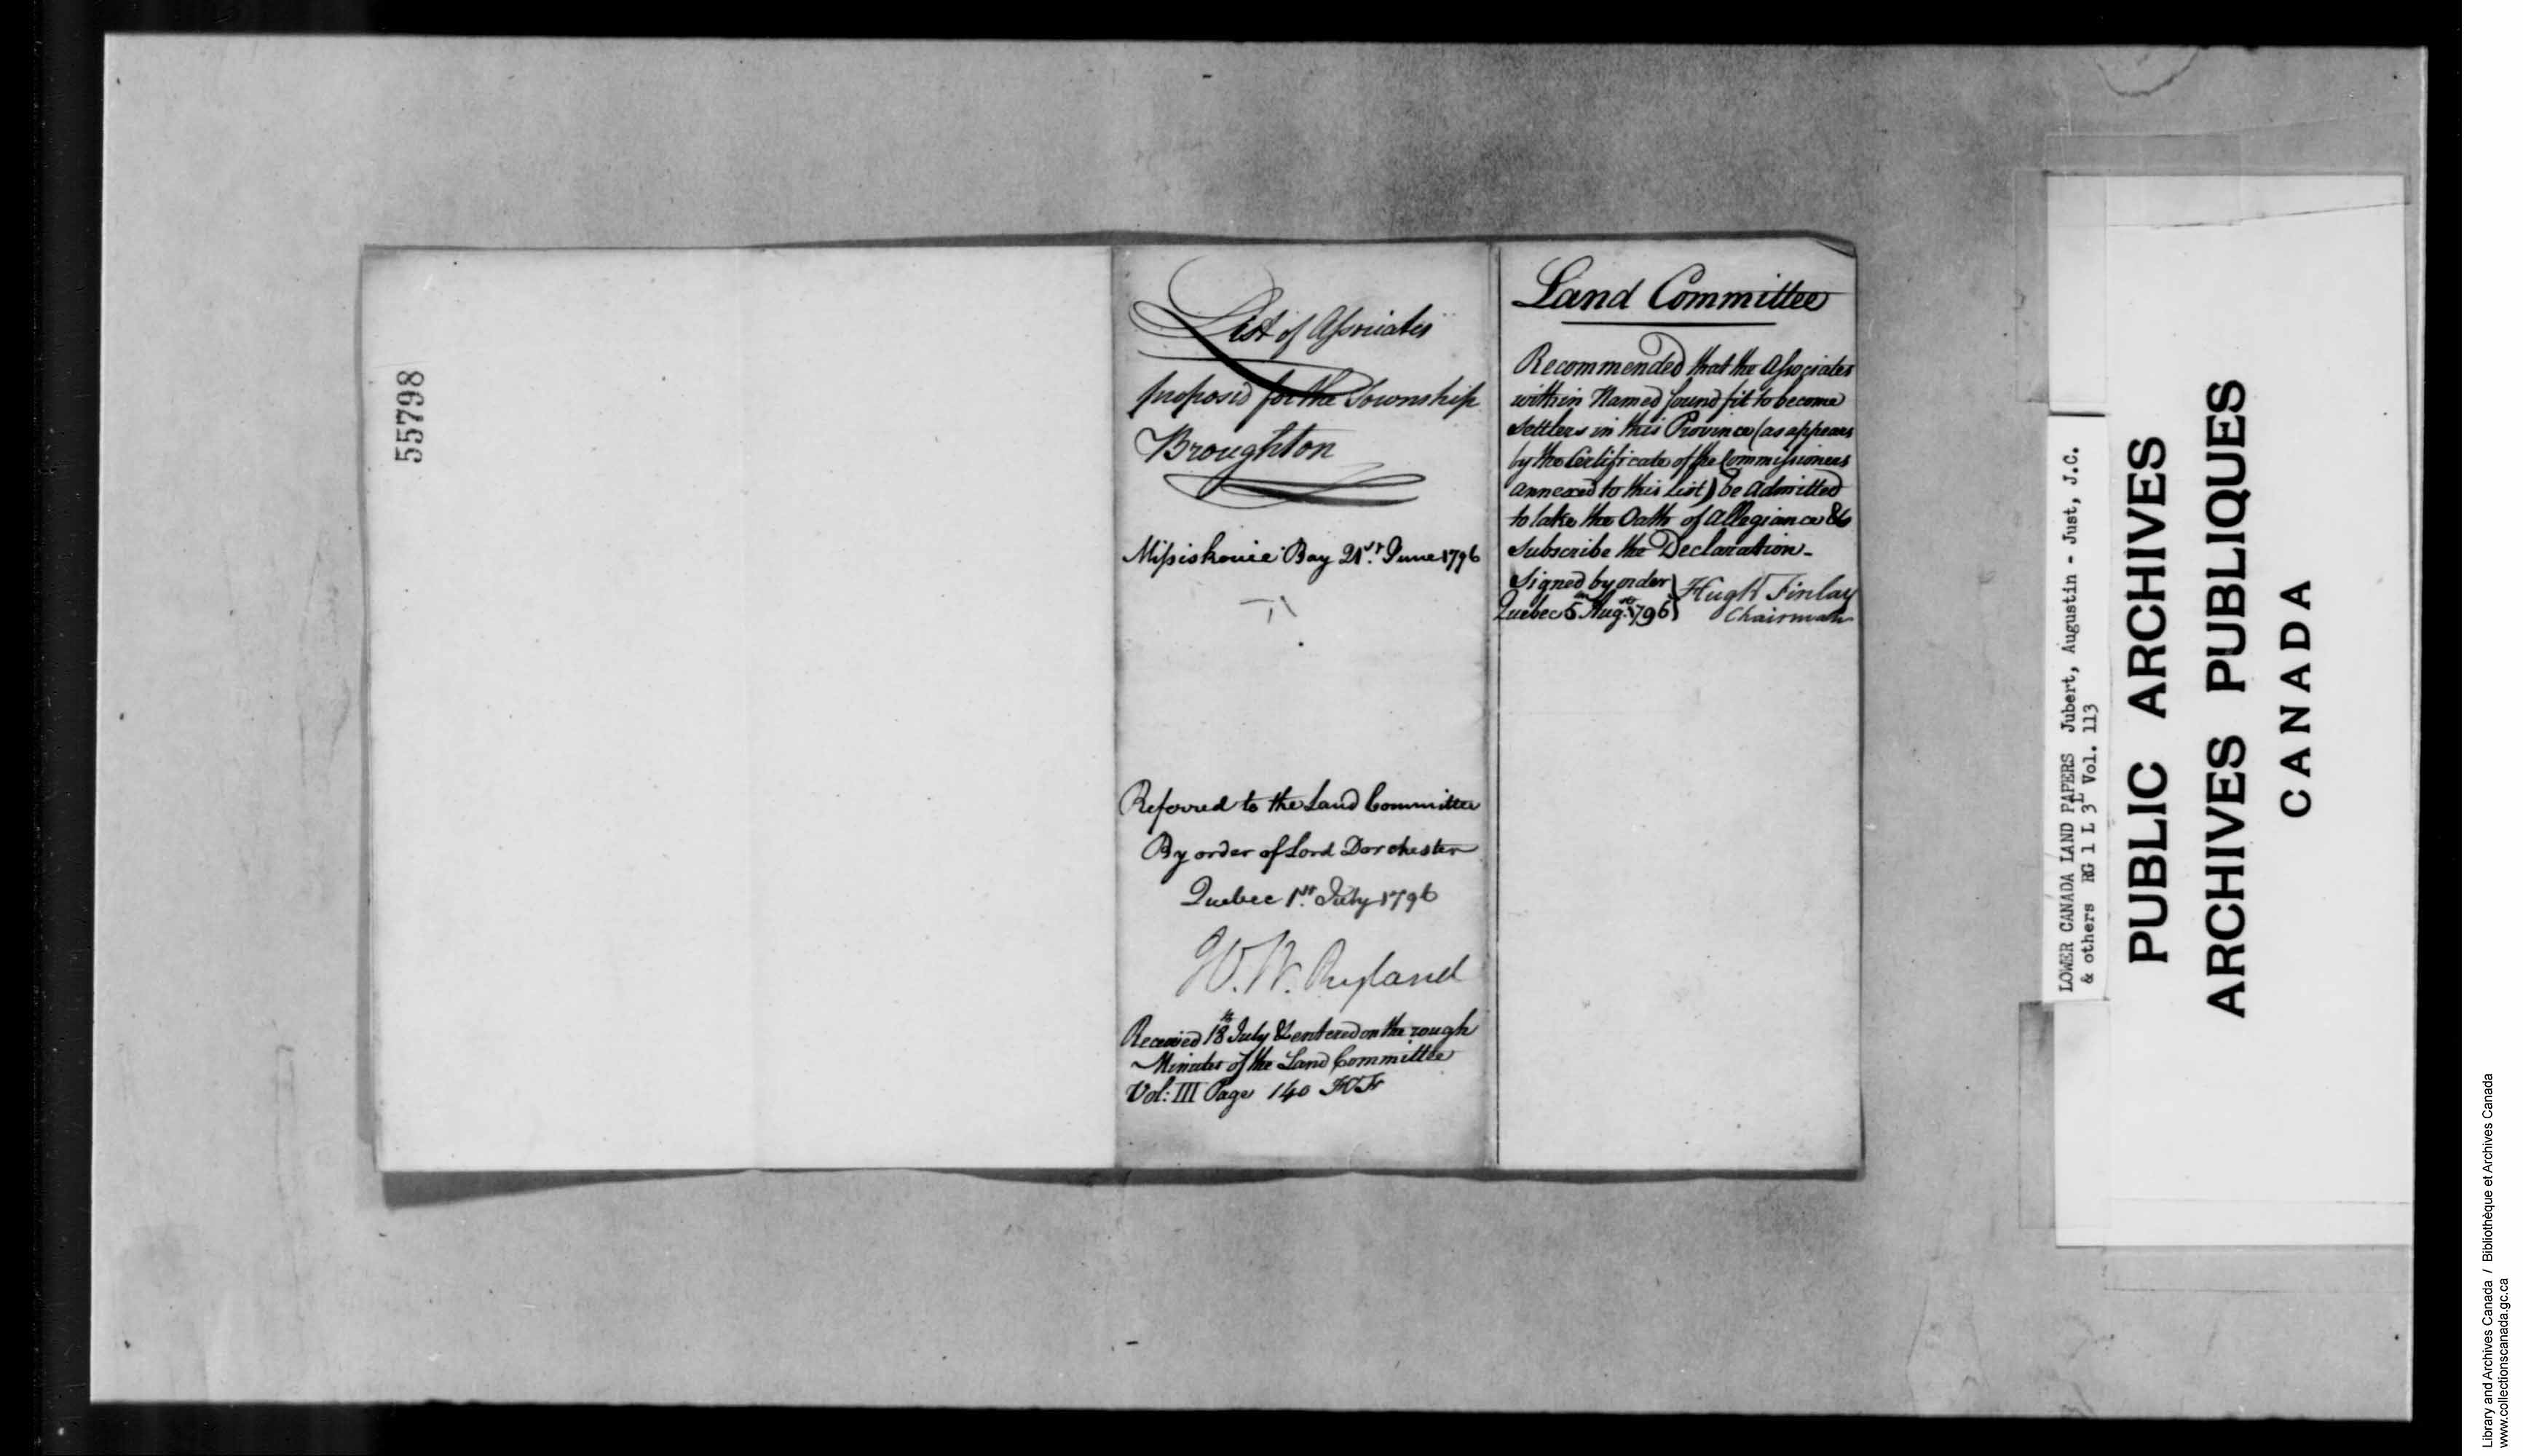 Digitized page of  for Image No.: e008700285